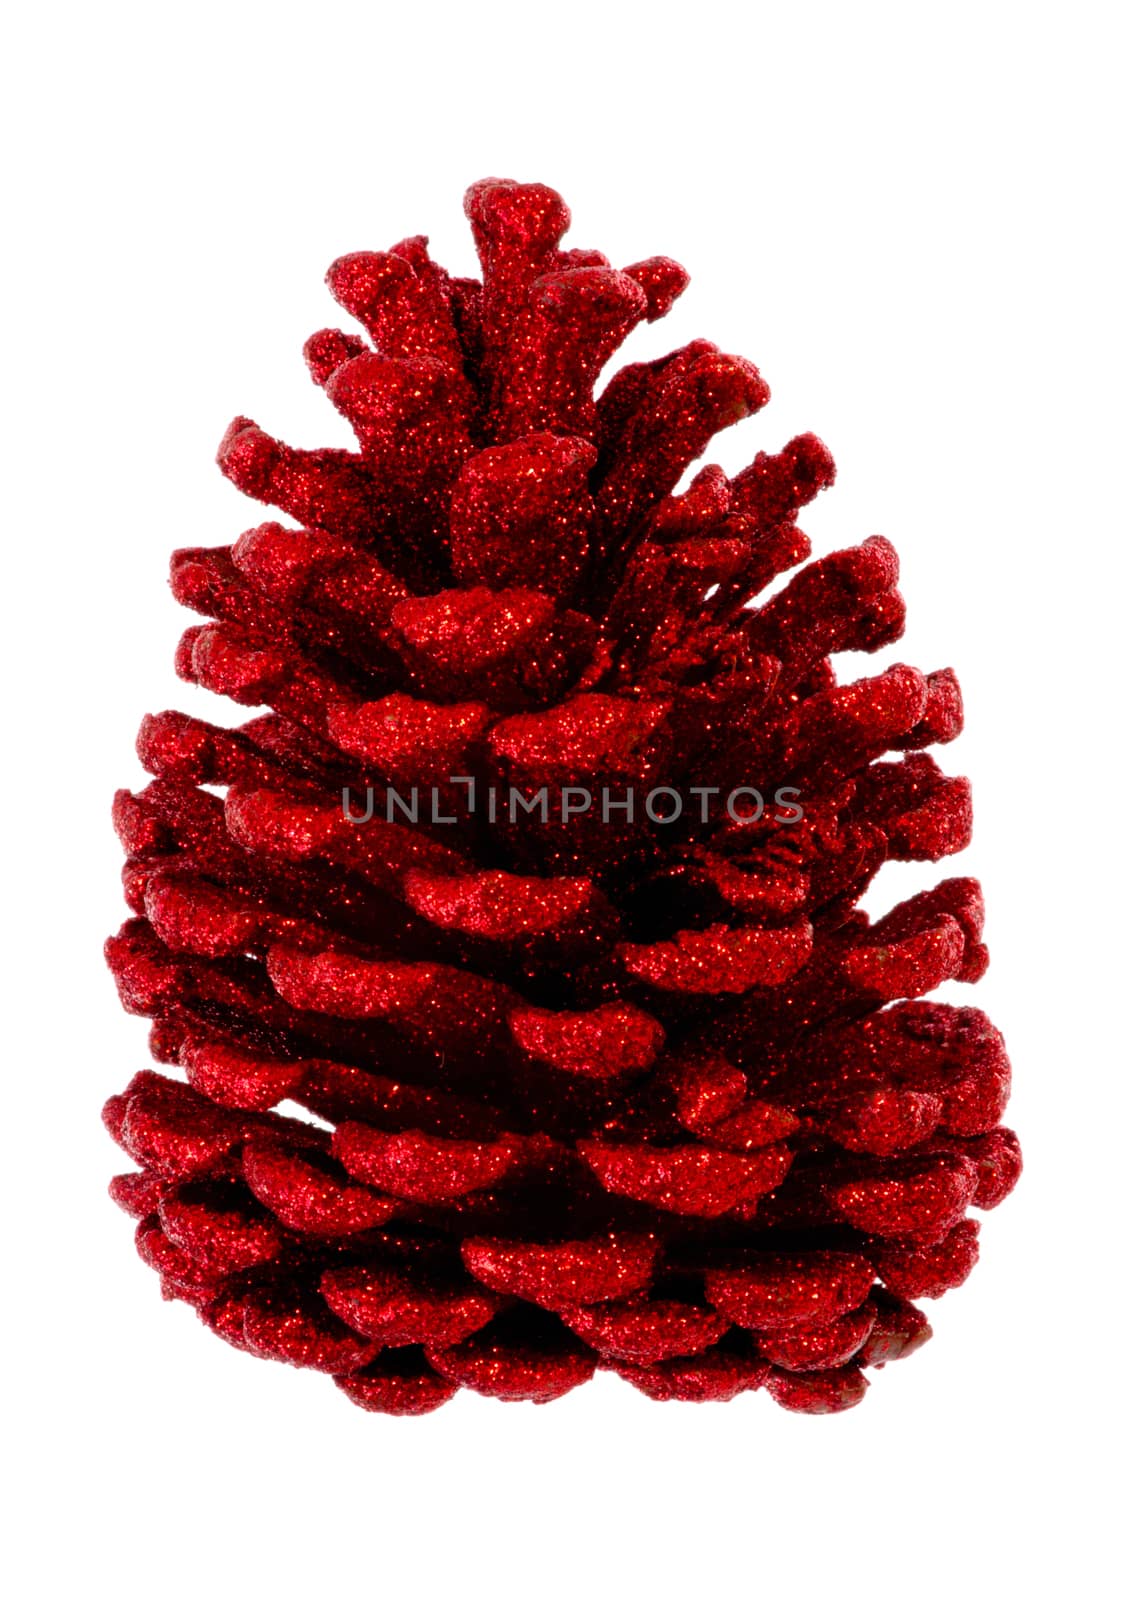 Red fir cone brightened by gwolters